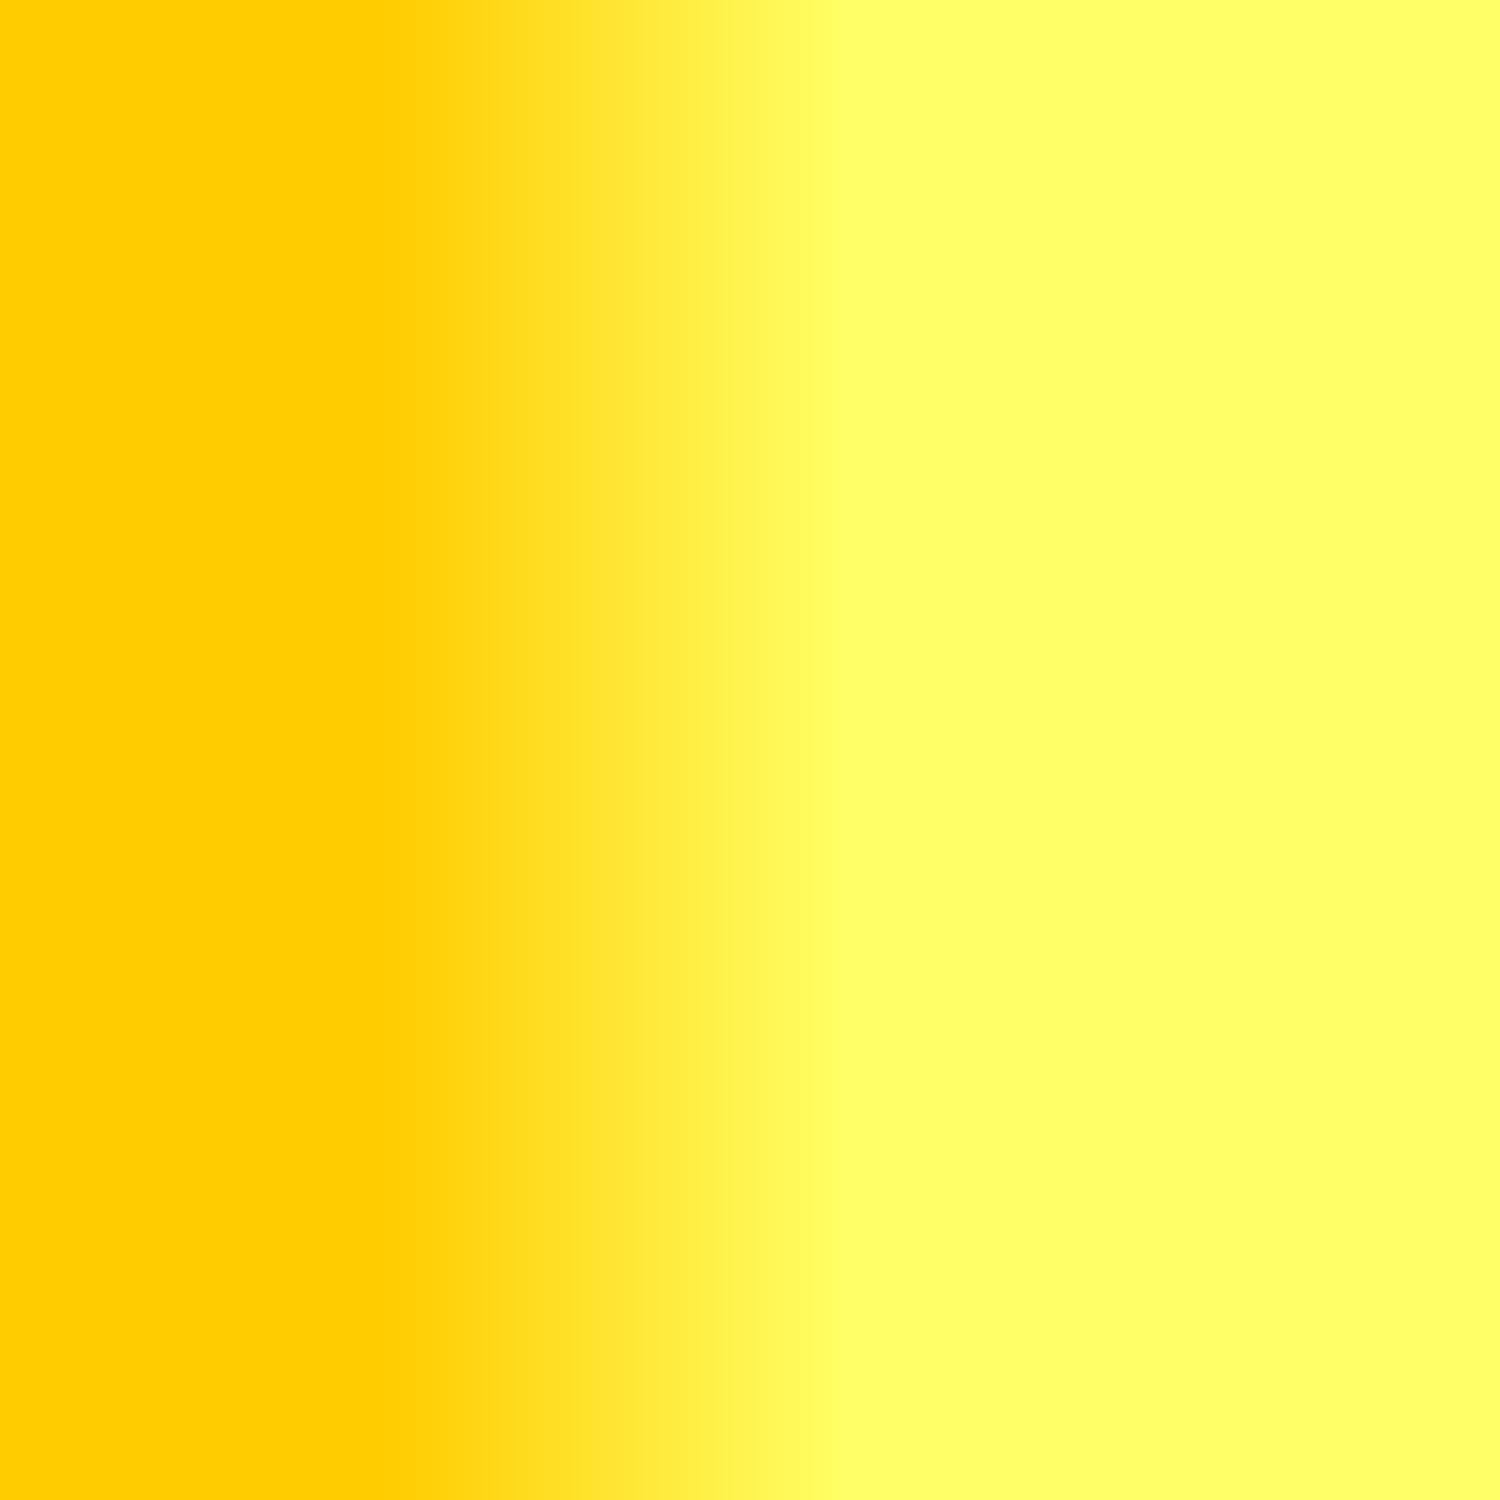 Pure Yellow Wallpaper Free Pure Yellow Background